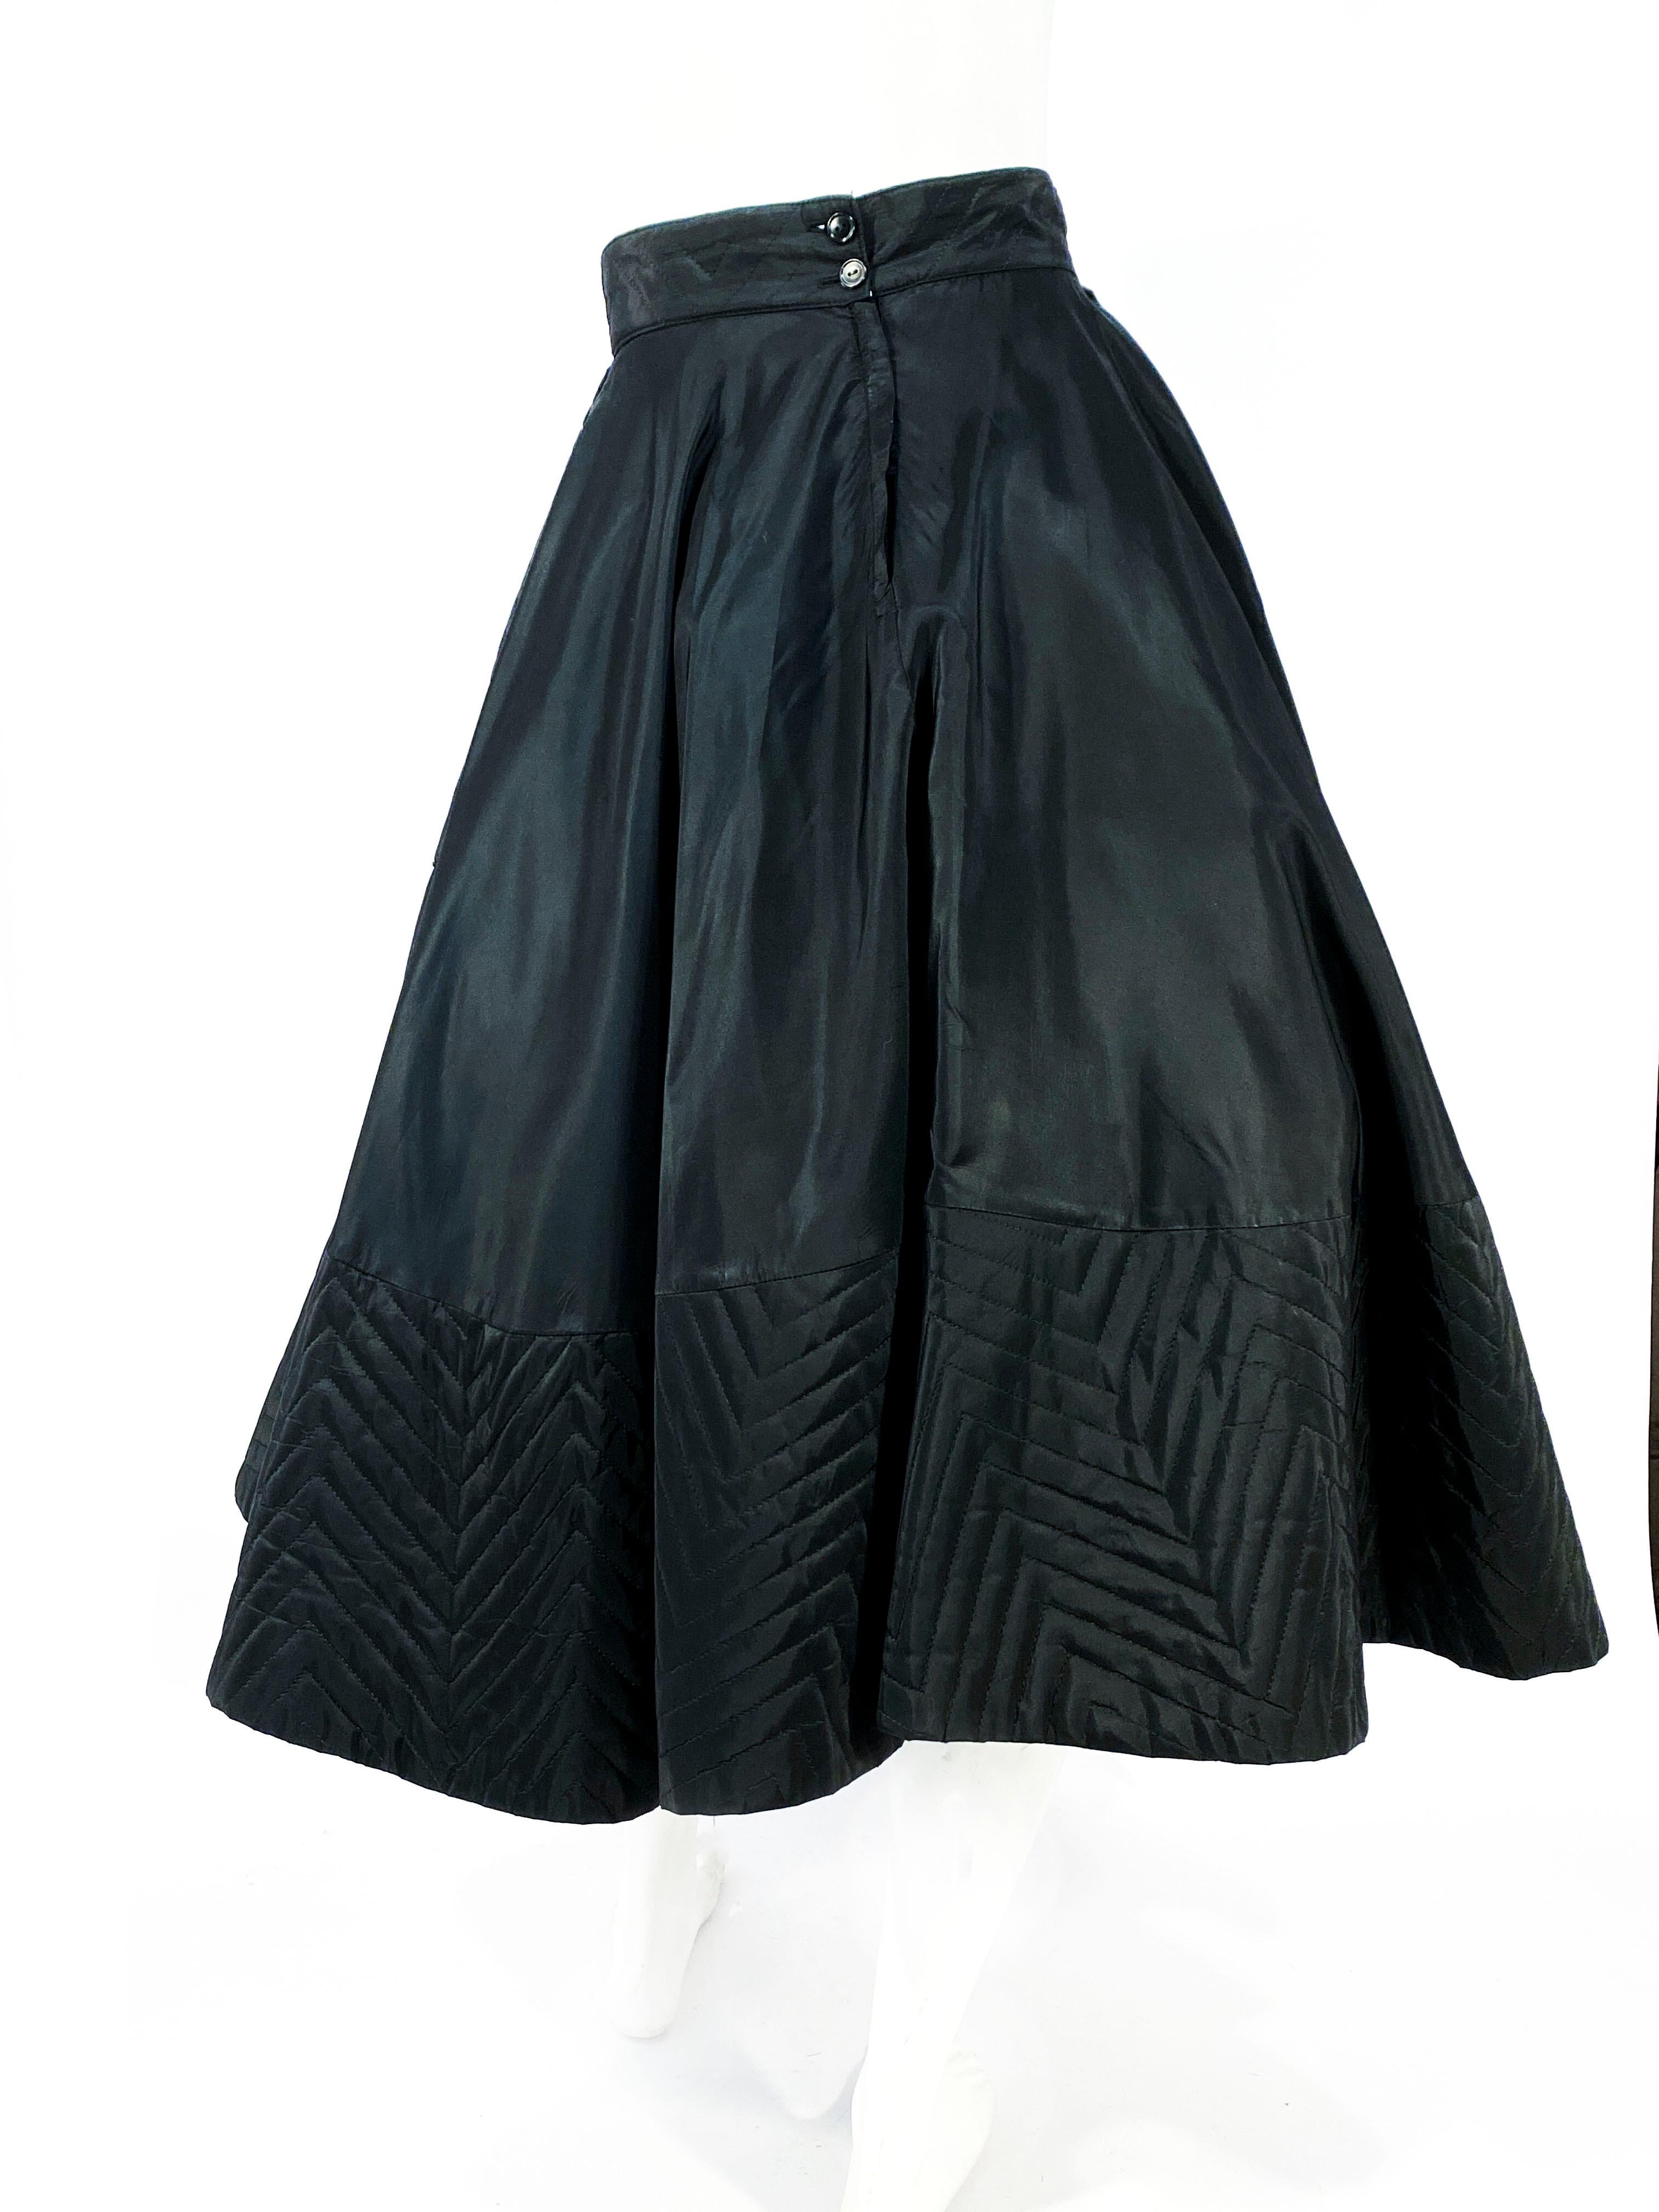 Women's or Men's 1950s Black Taffeta and Quilted Circle Skirt